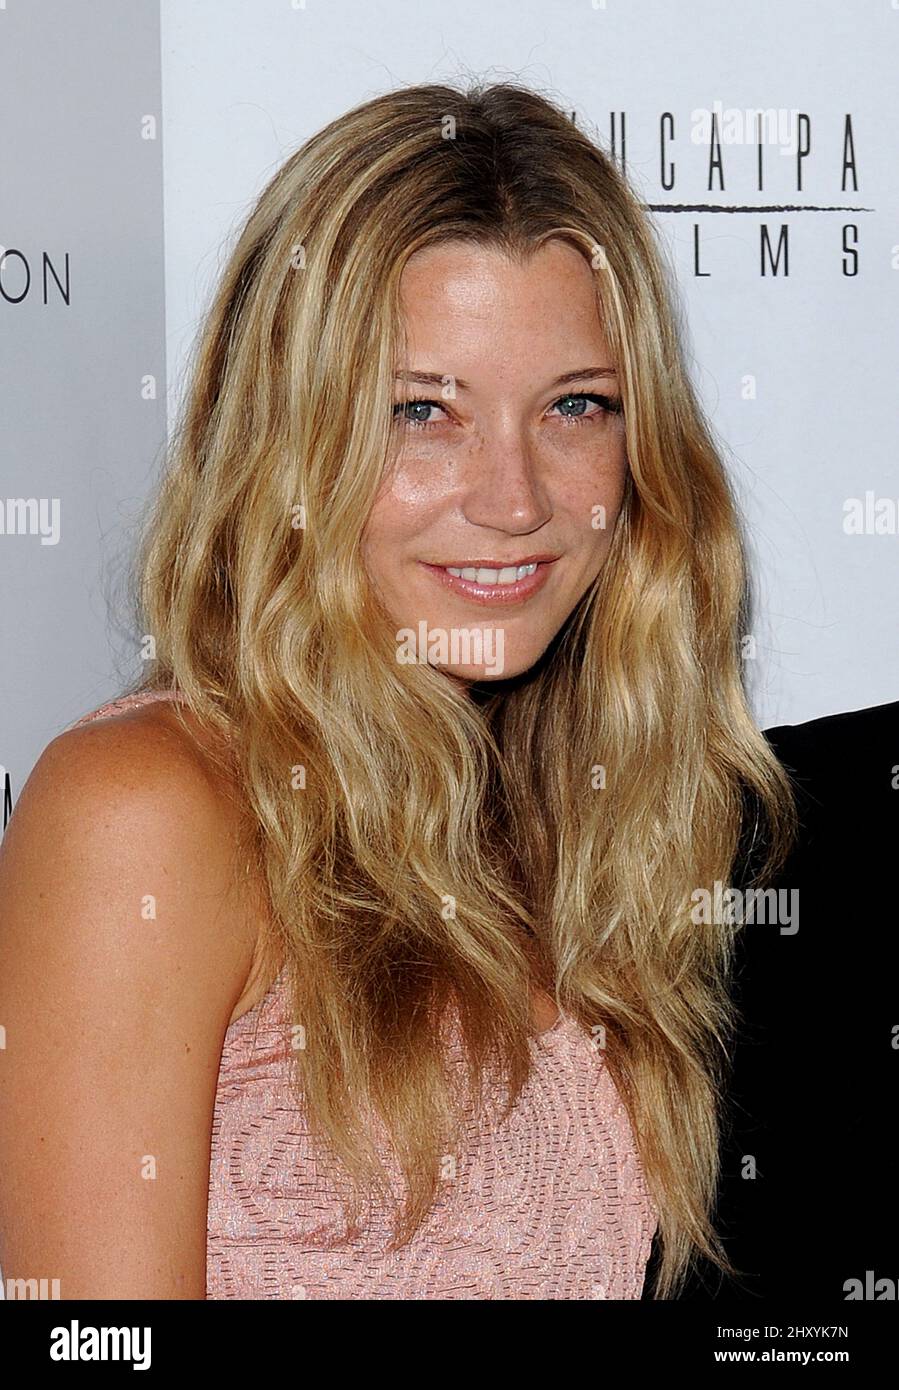 Sarah Roemer attends the 'Lawless' premiere held at the ArcLight, Los Angeles. Stock Photo